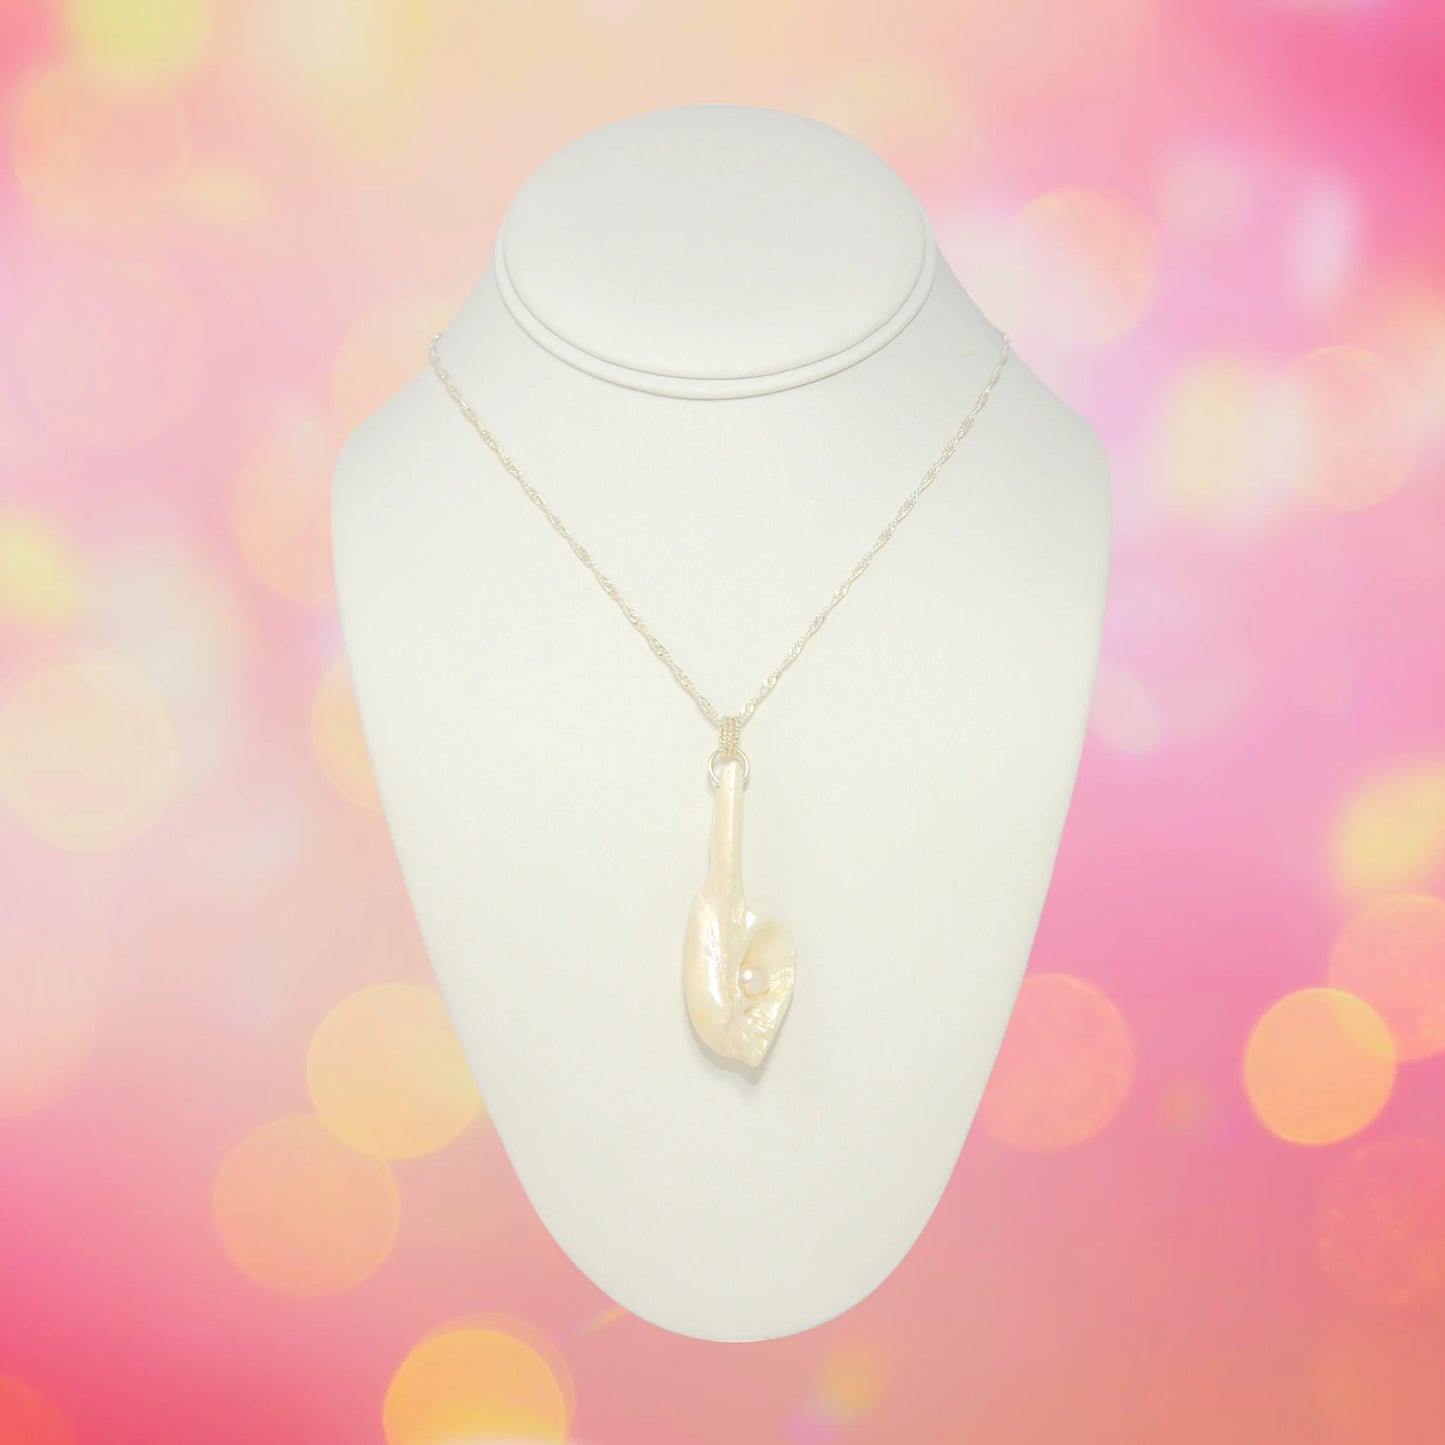 Amara is the name of this one of a kind pendant made from a natural seashell from the beach of Vancouver Island.  The pendant has a real freshwater pearl.  The pendant is being showcased on a neckline with a pink bokeh background.